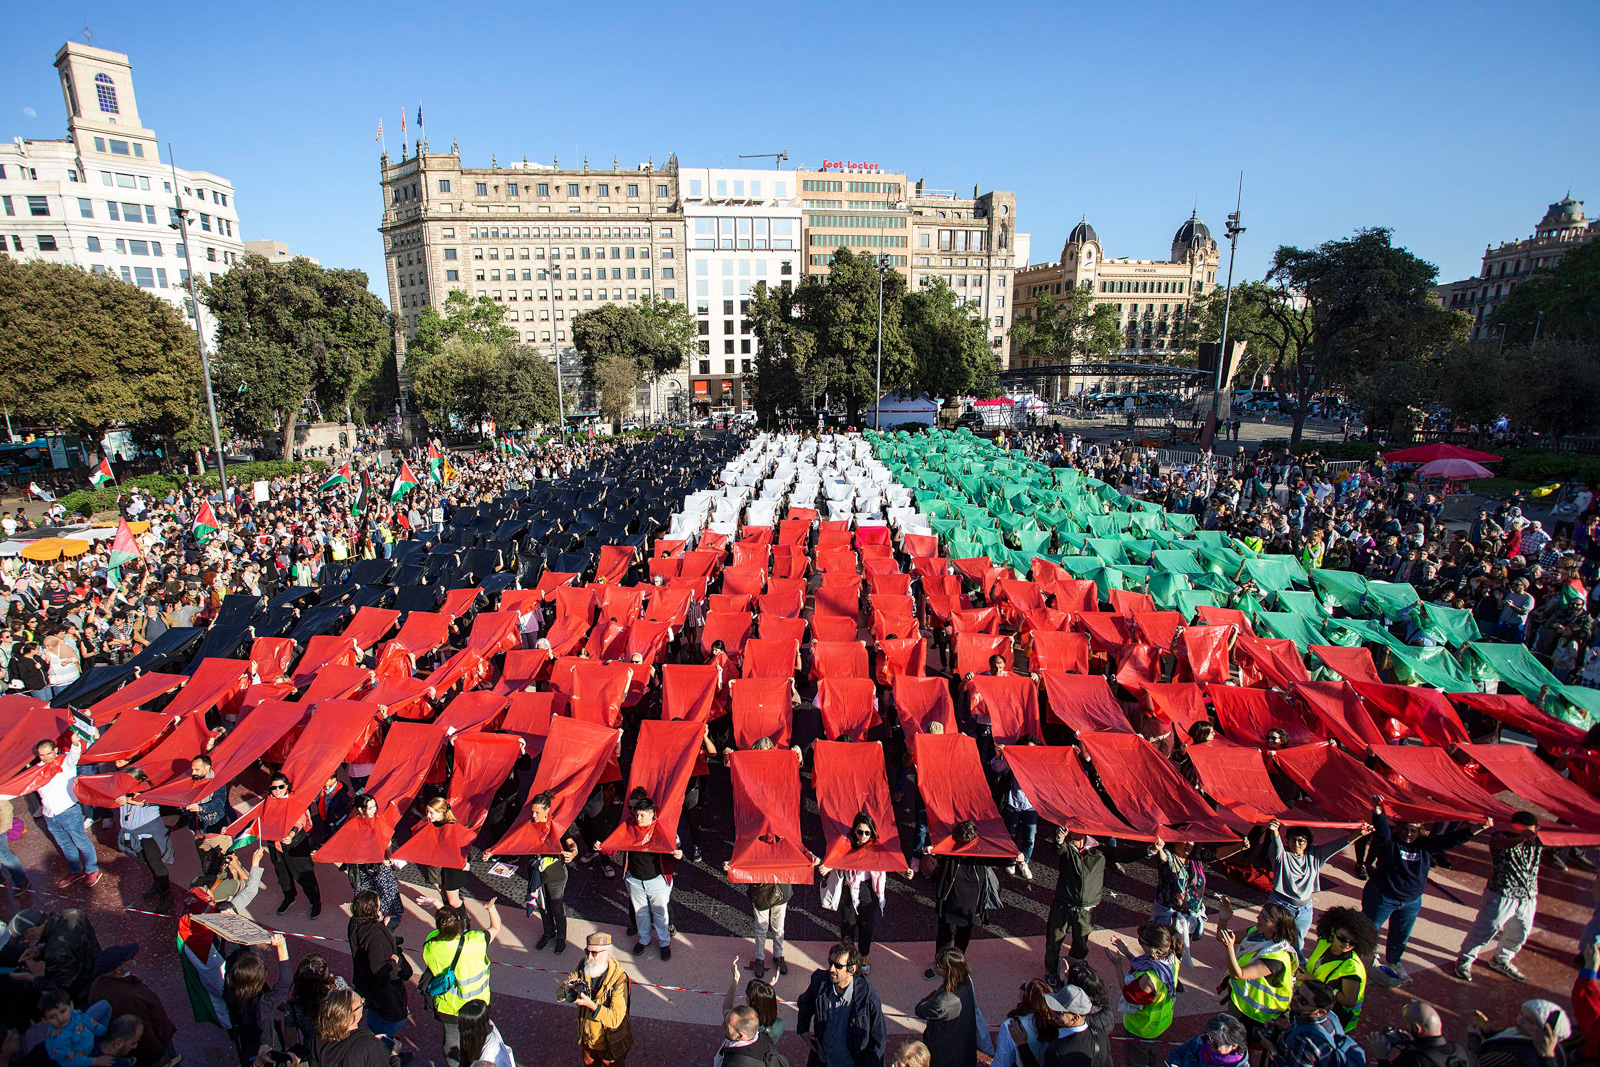 Spain is set to recognise the state of Palestine before the summer. What will this change?